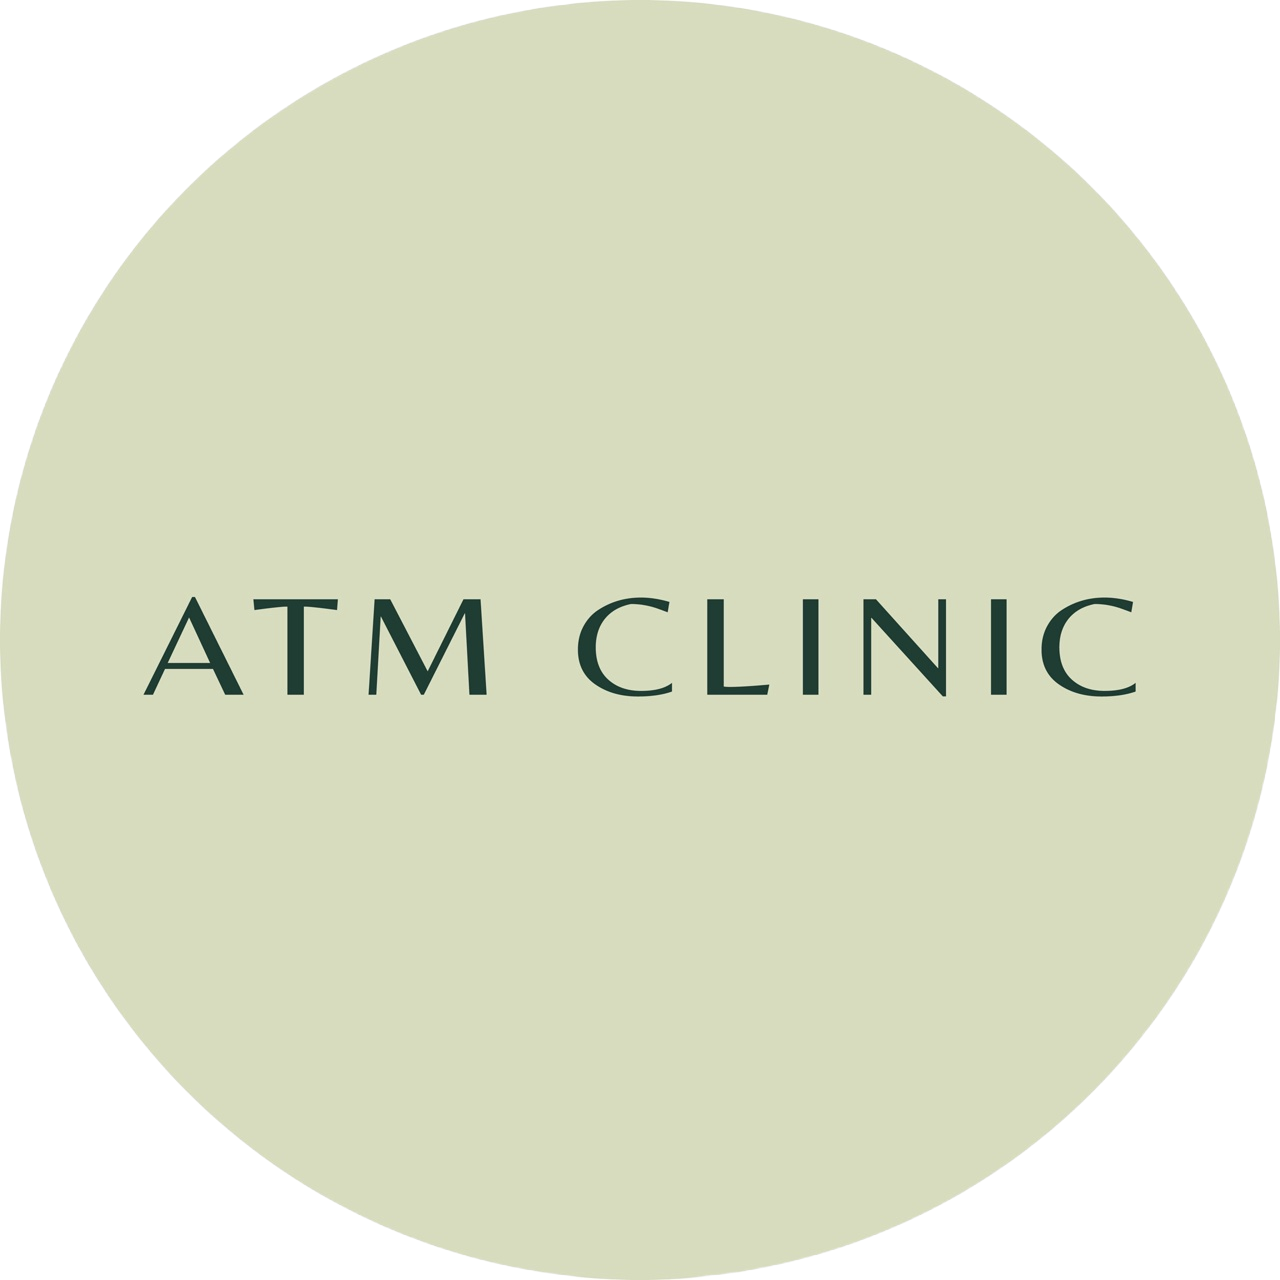 ATM CLINIC